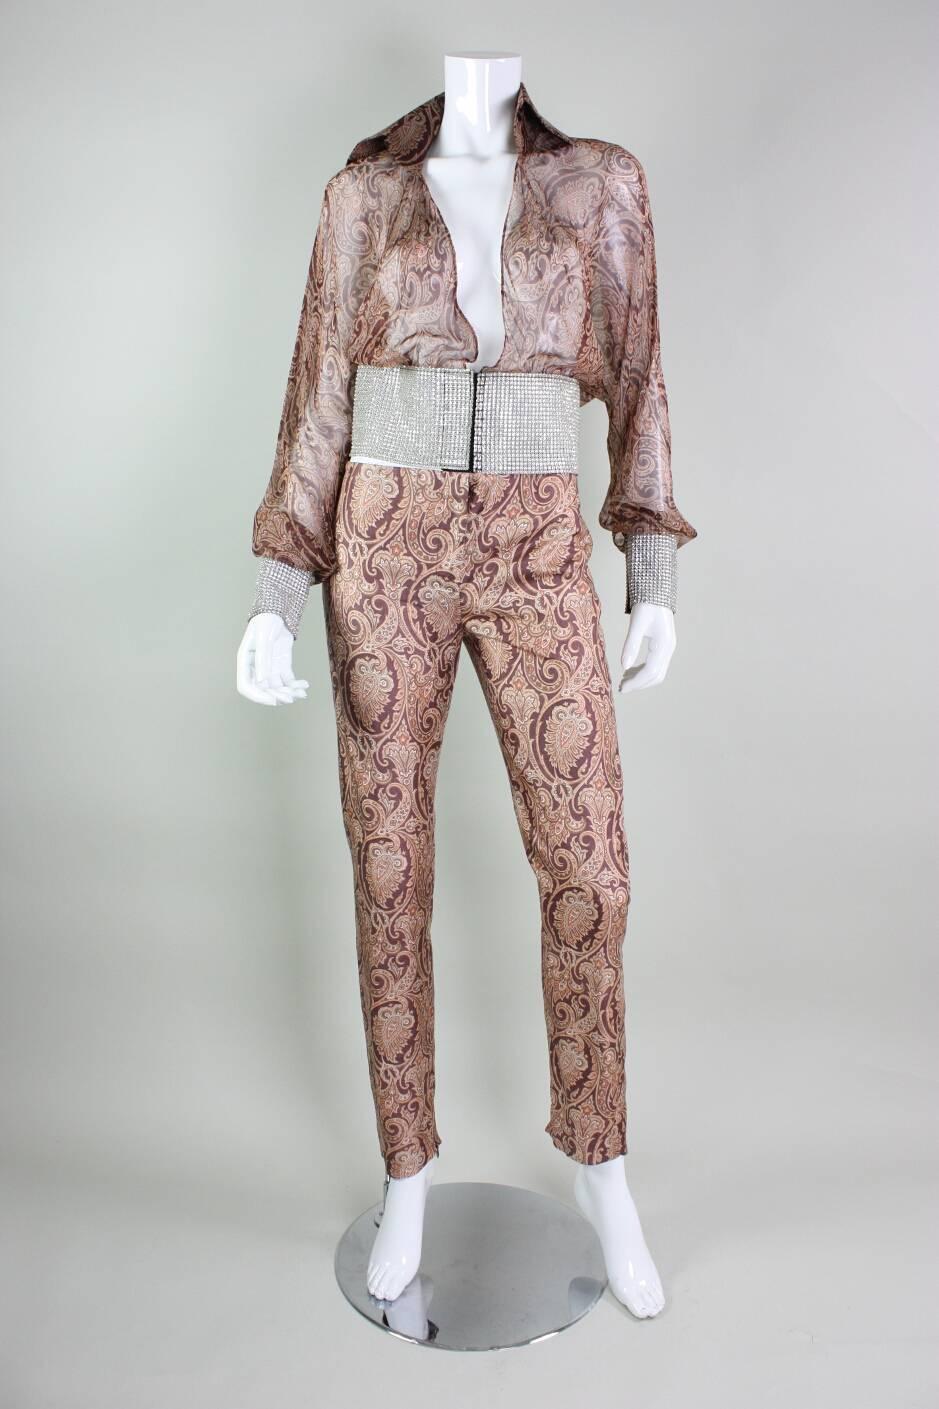 Vintage ensemble from Dolce & Gabbana likely dates to the 1990’s.  Blouse is made of a lightweight paisley silk chiffon with wide rhinestone bands at the waist and cuffs.  Flat front silk pants have patch pockets on the buttocks.  Zippered ankle